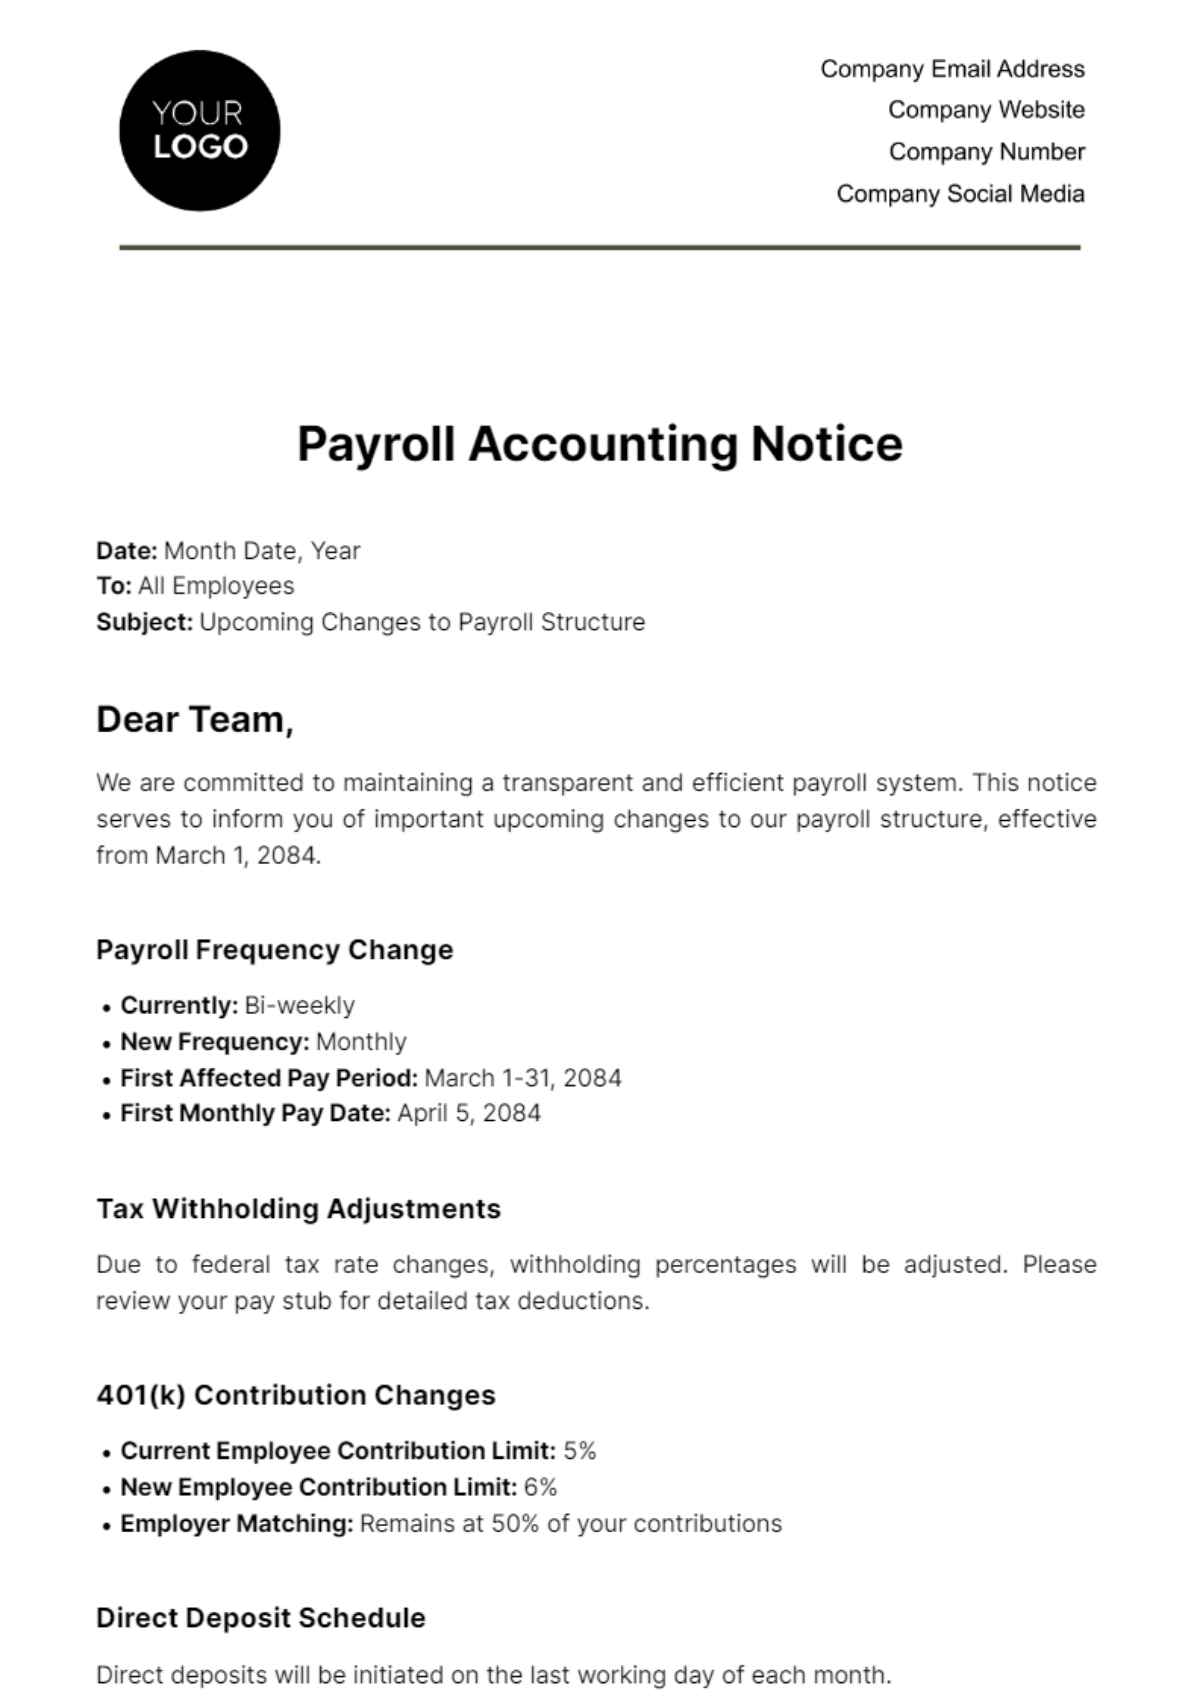 Free Payroll Accounting Notice Template